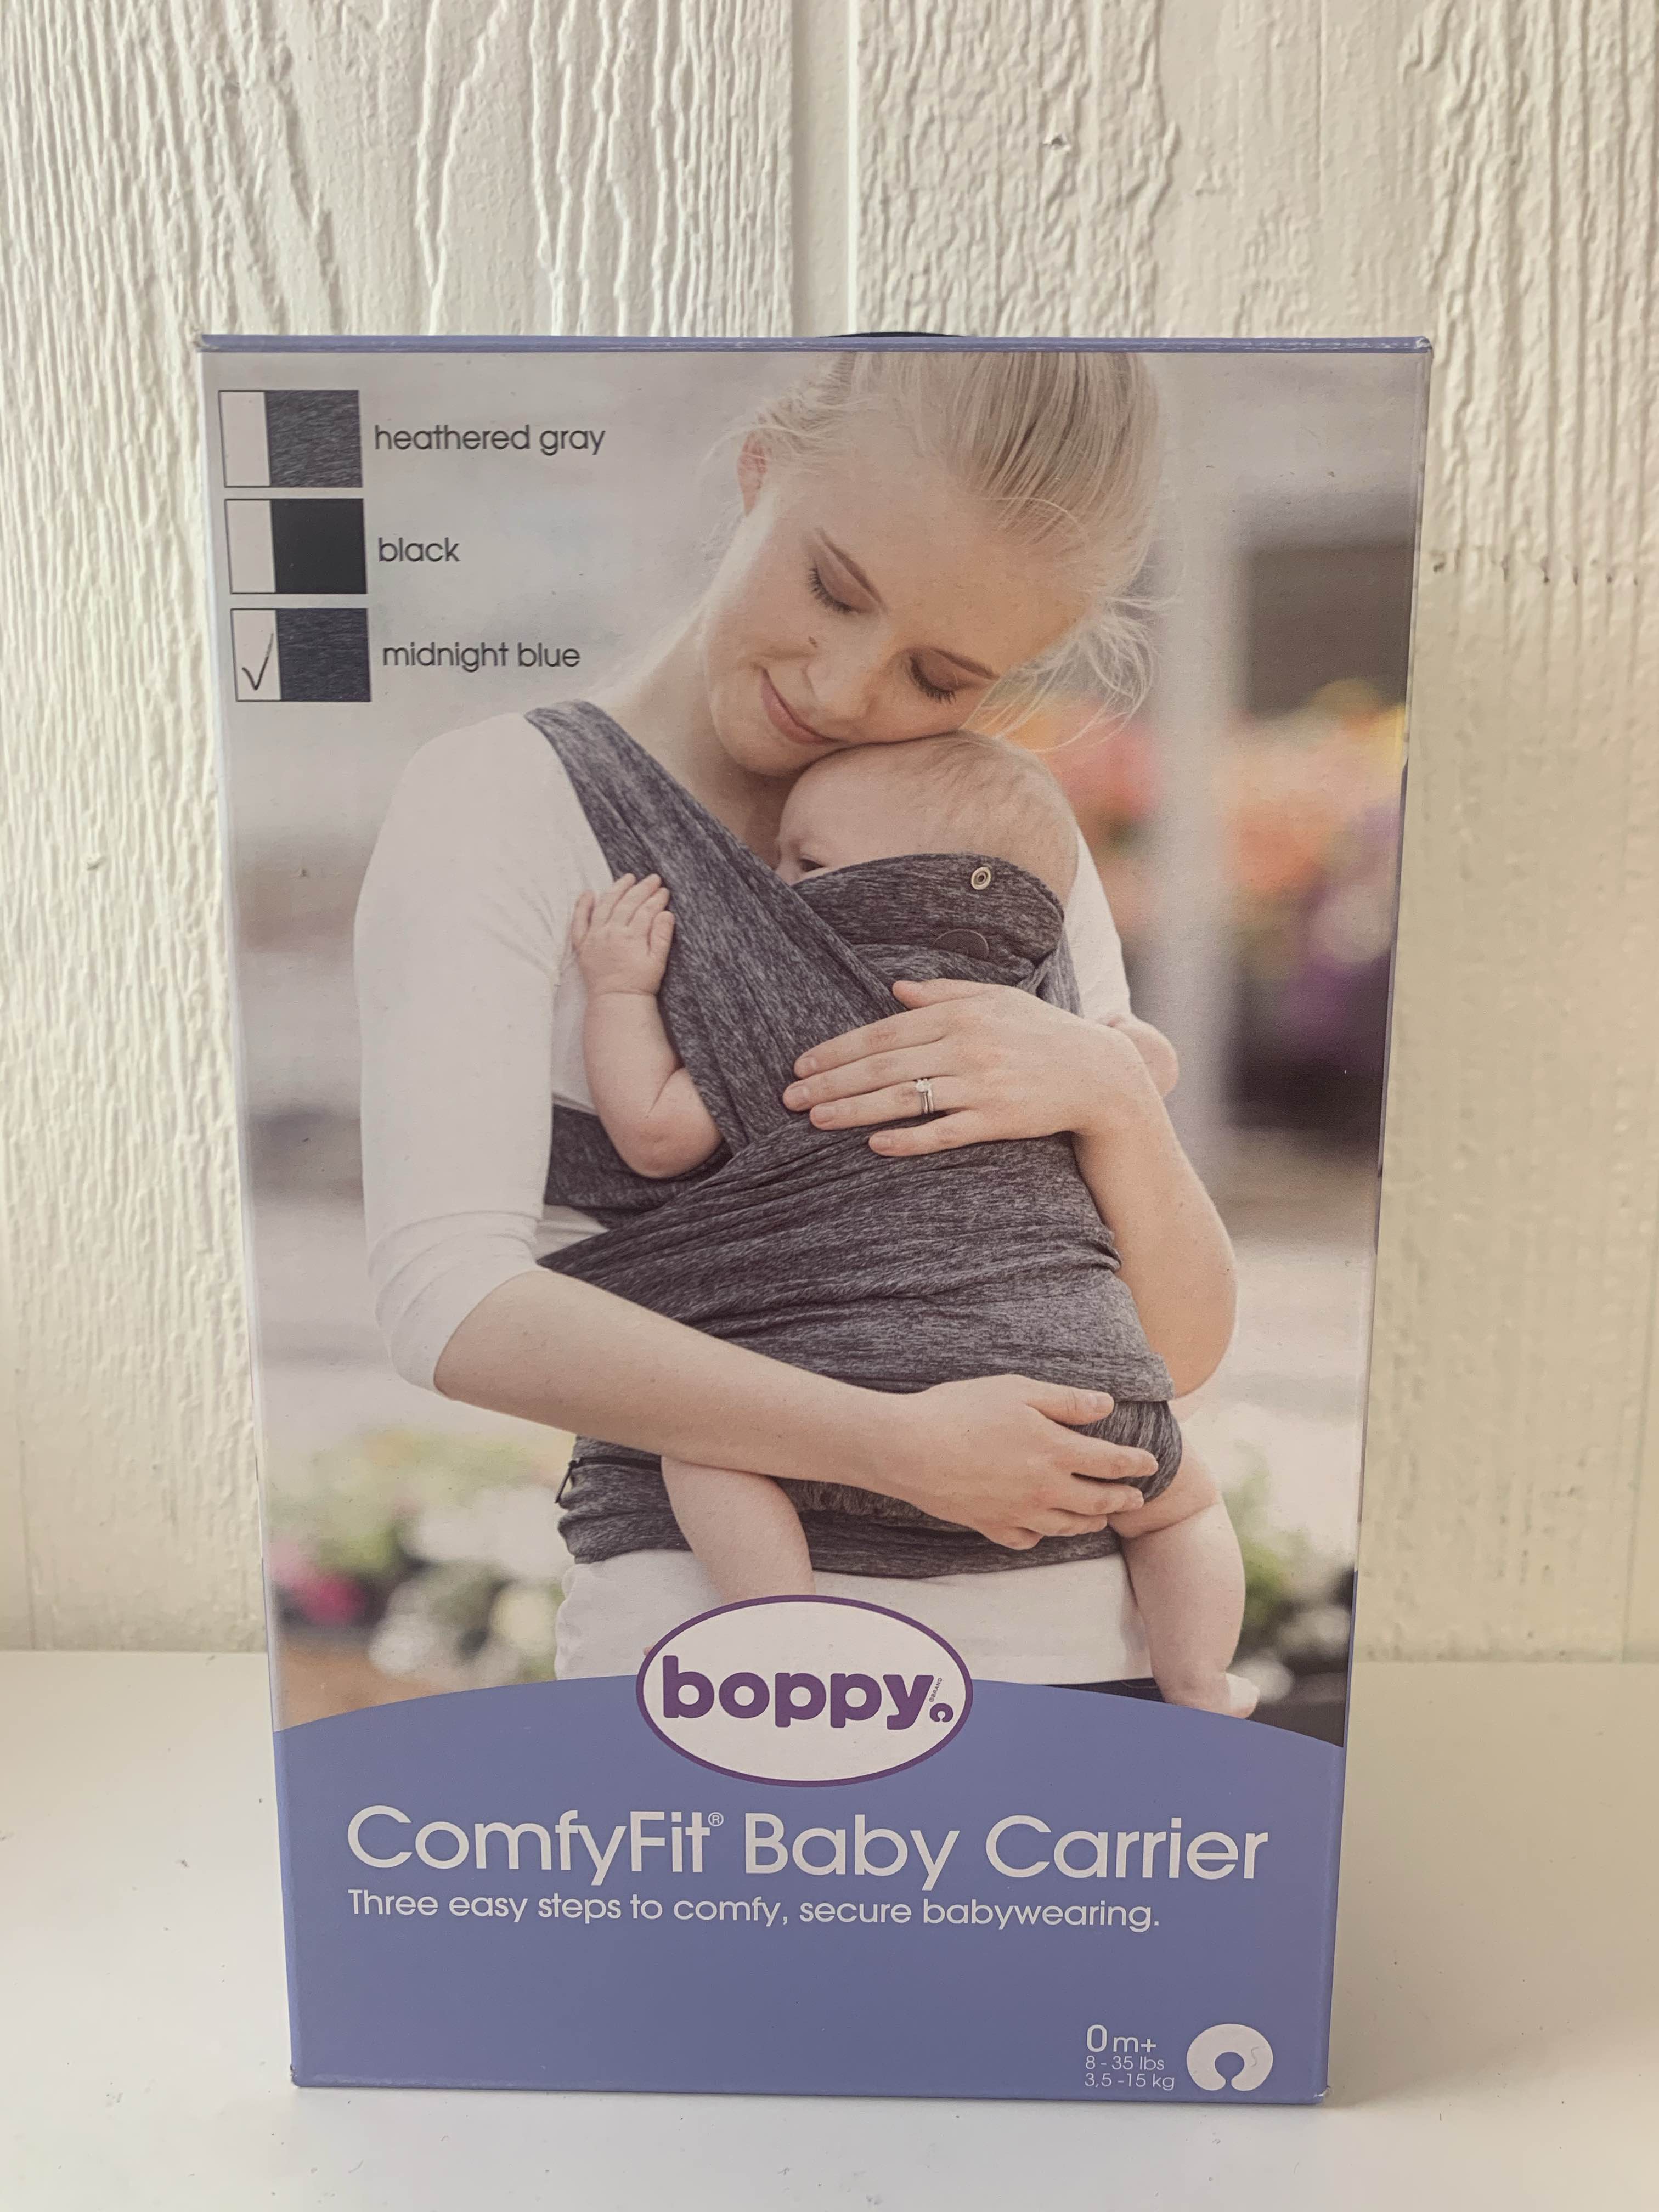 boppy comfyfit baby carrier heathered gray